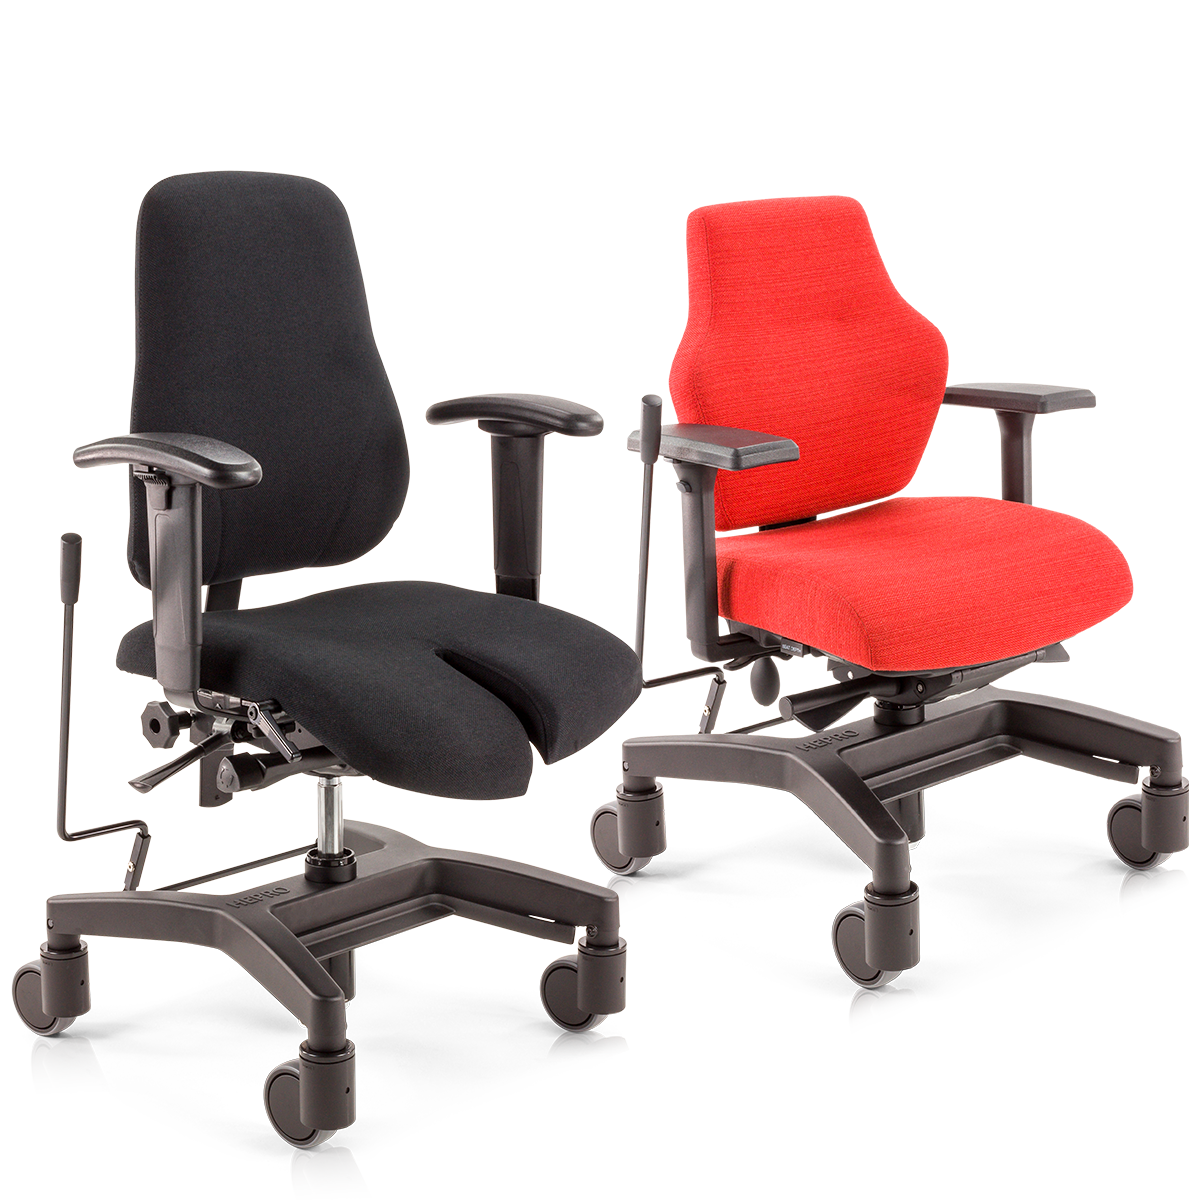 Score Mobility work chairs